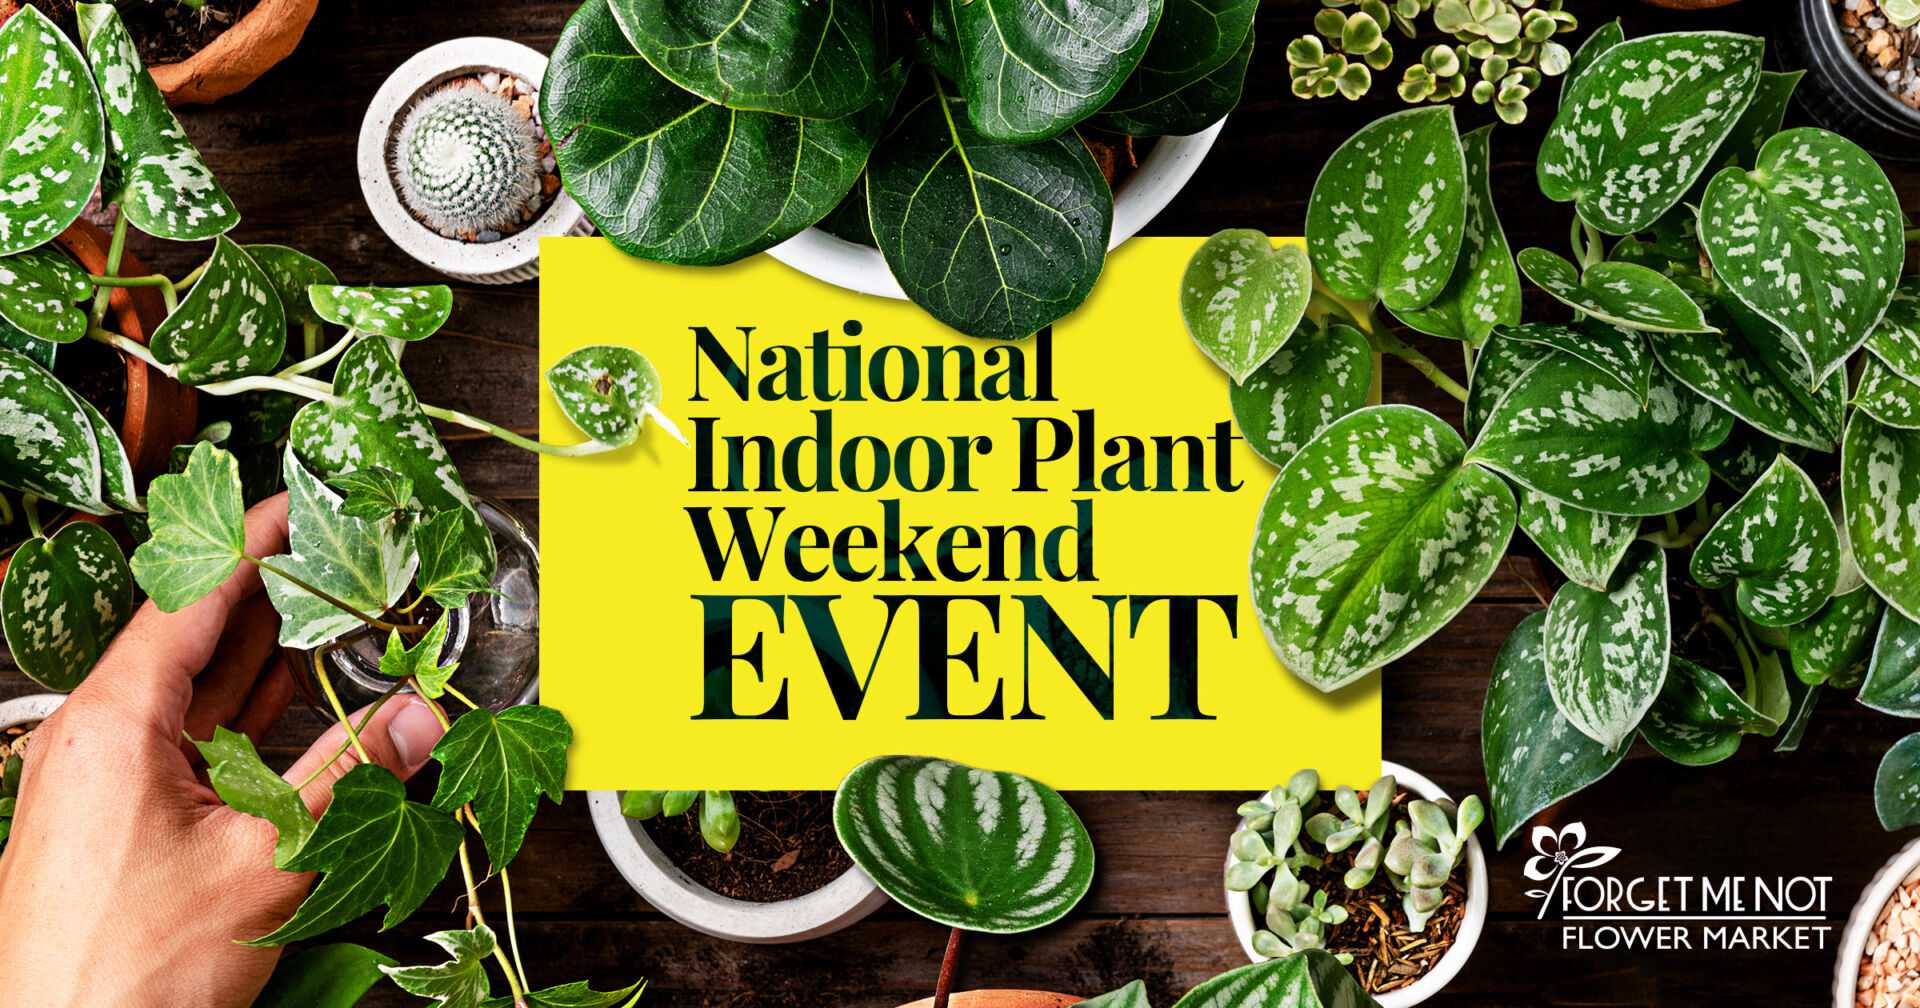 Annual National Indoor Plant Weekend Event - Forget Me Not Flower Market Bonita Springs